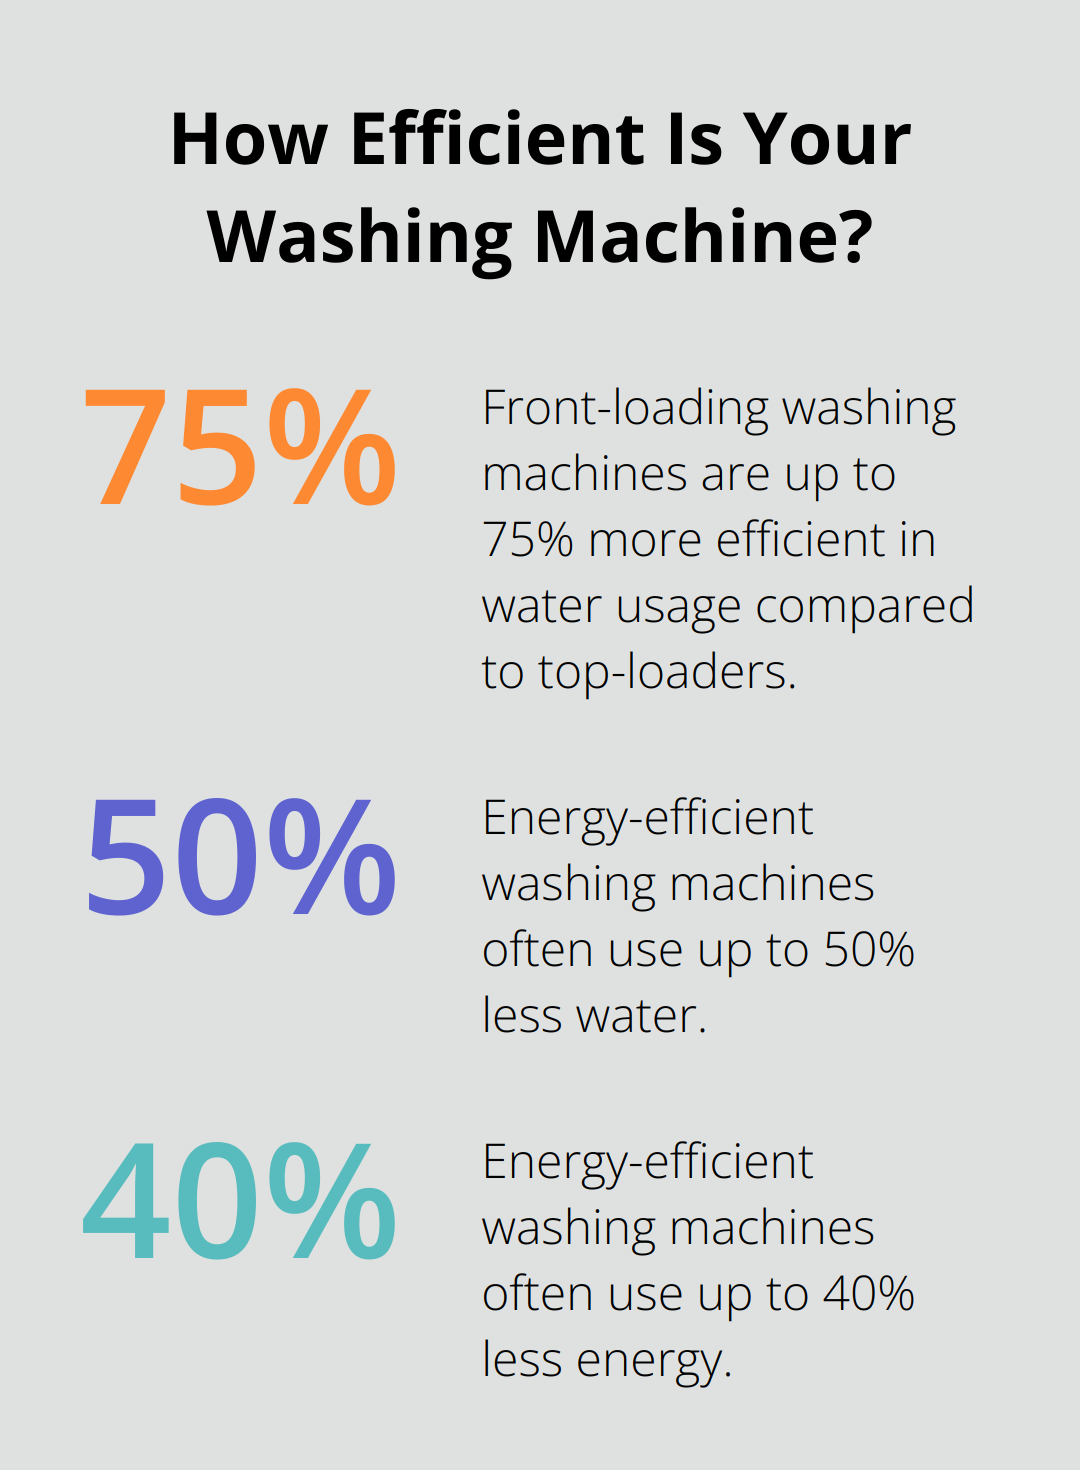 Fact - How Efficient Is Your Washing Machine?